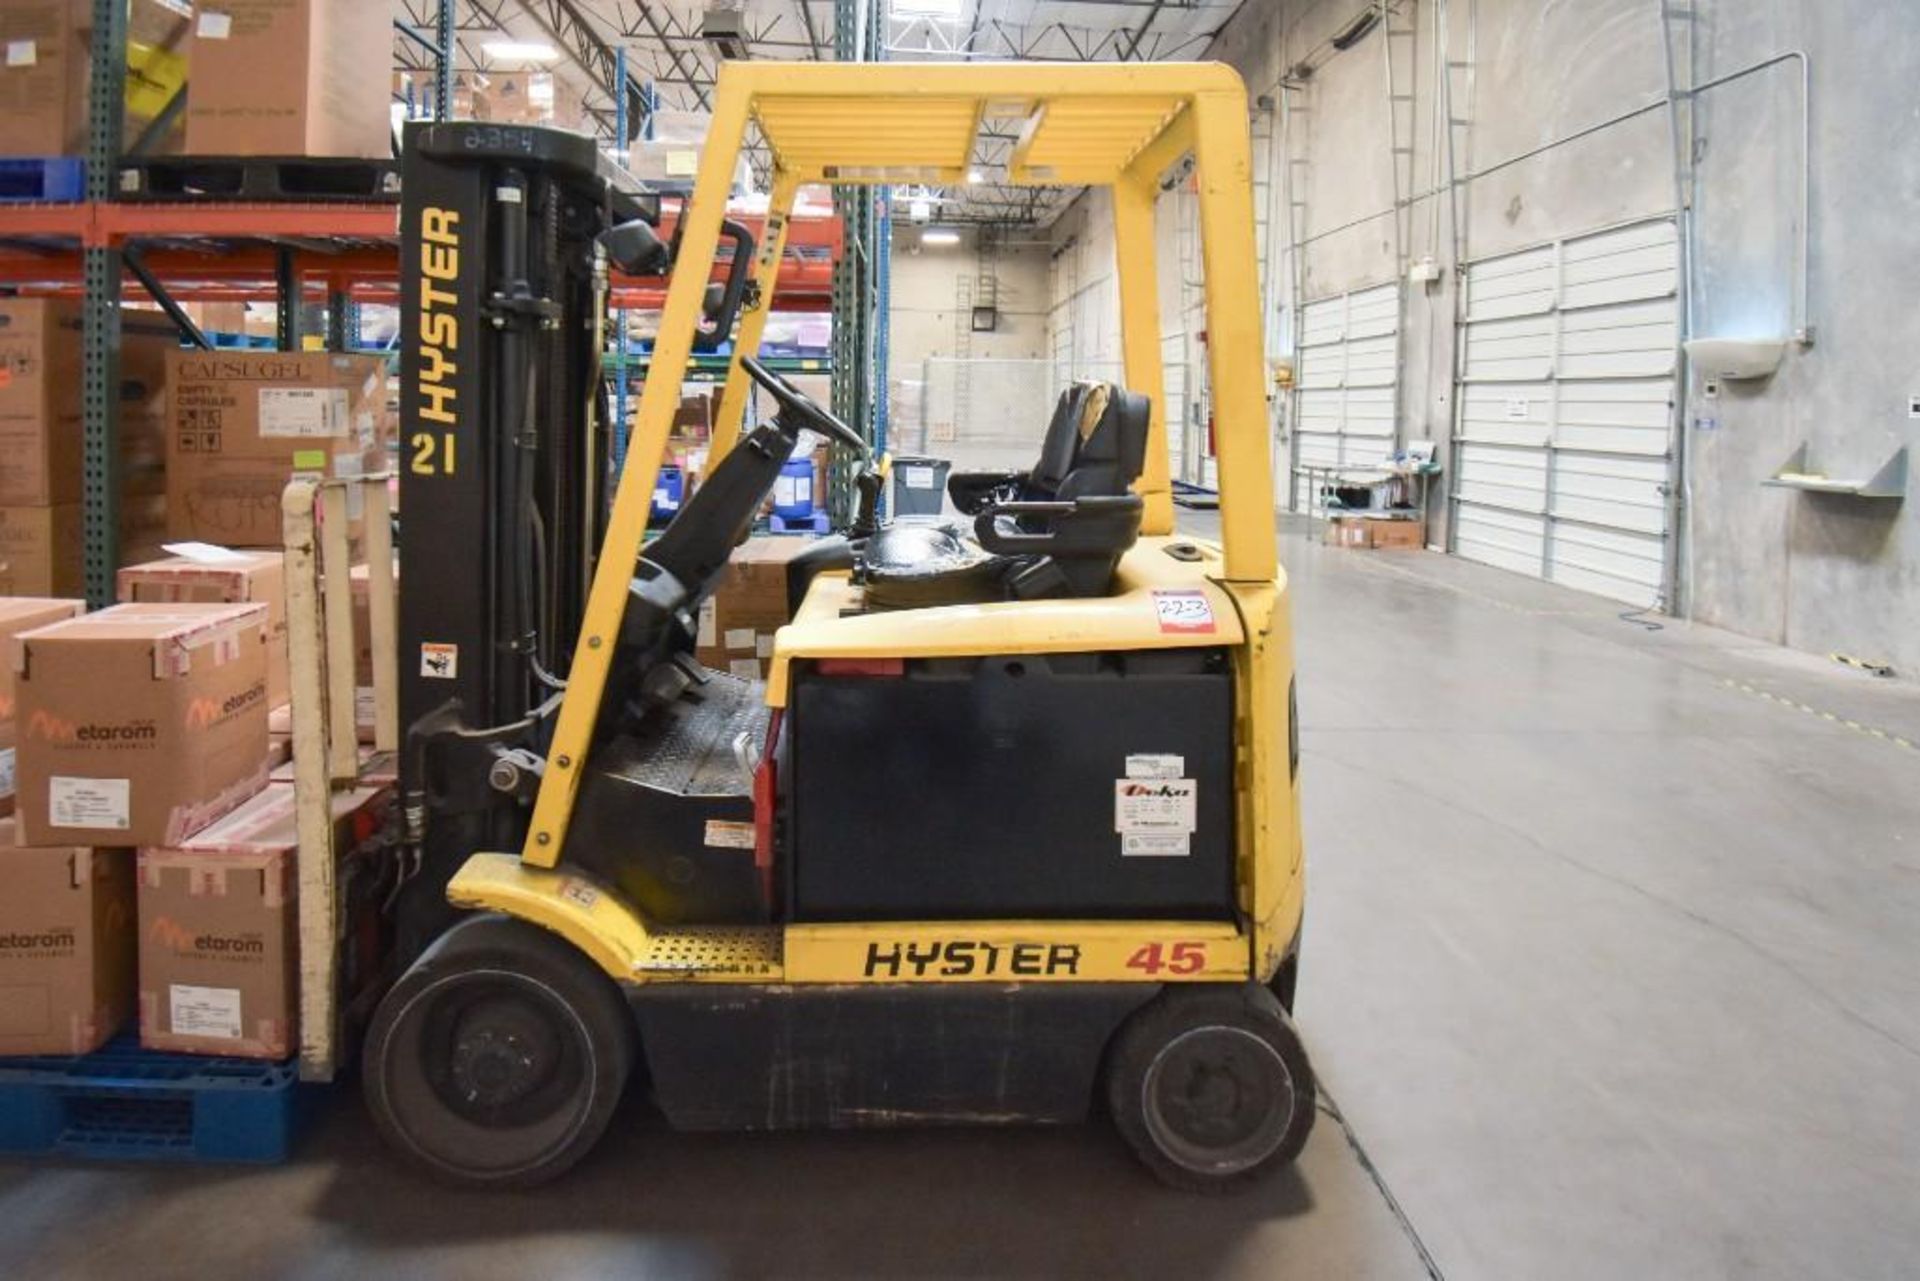 Hyster 45 Forklift w/ high frequency enforcer charger